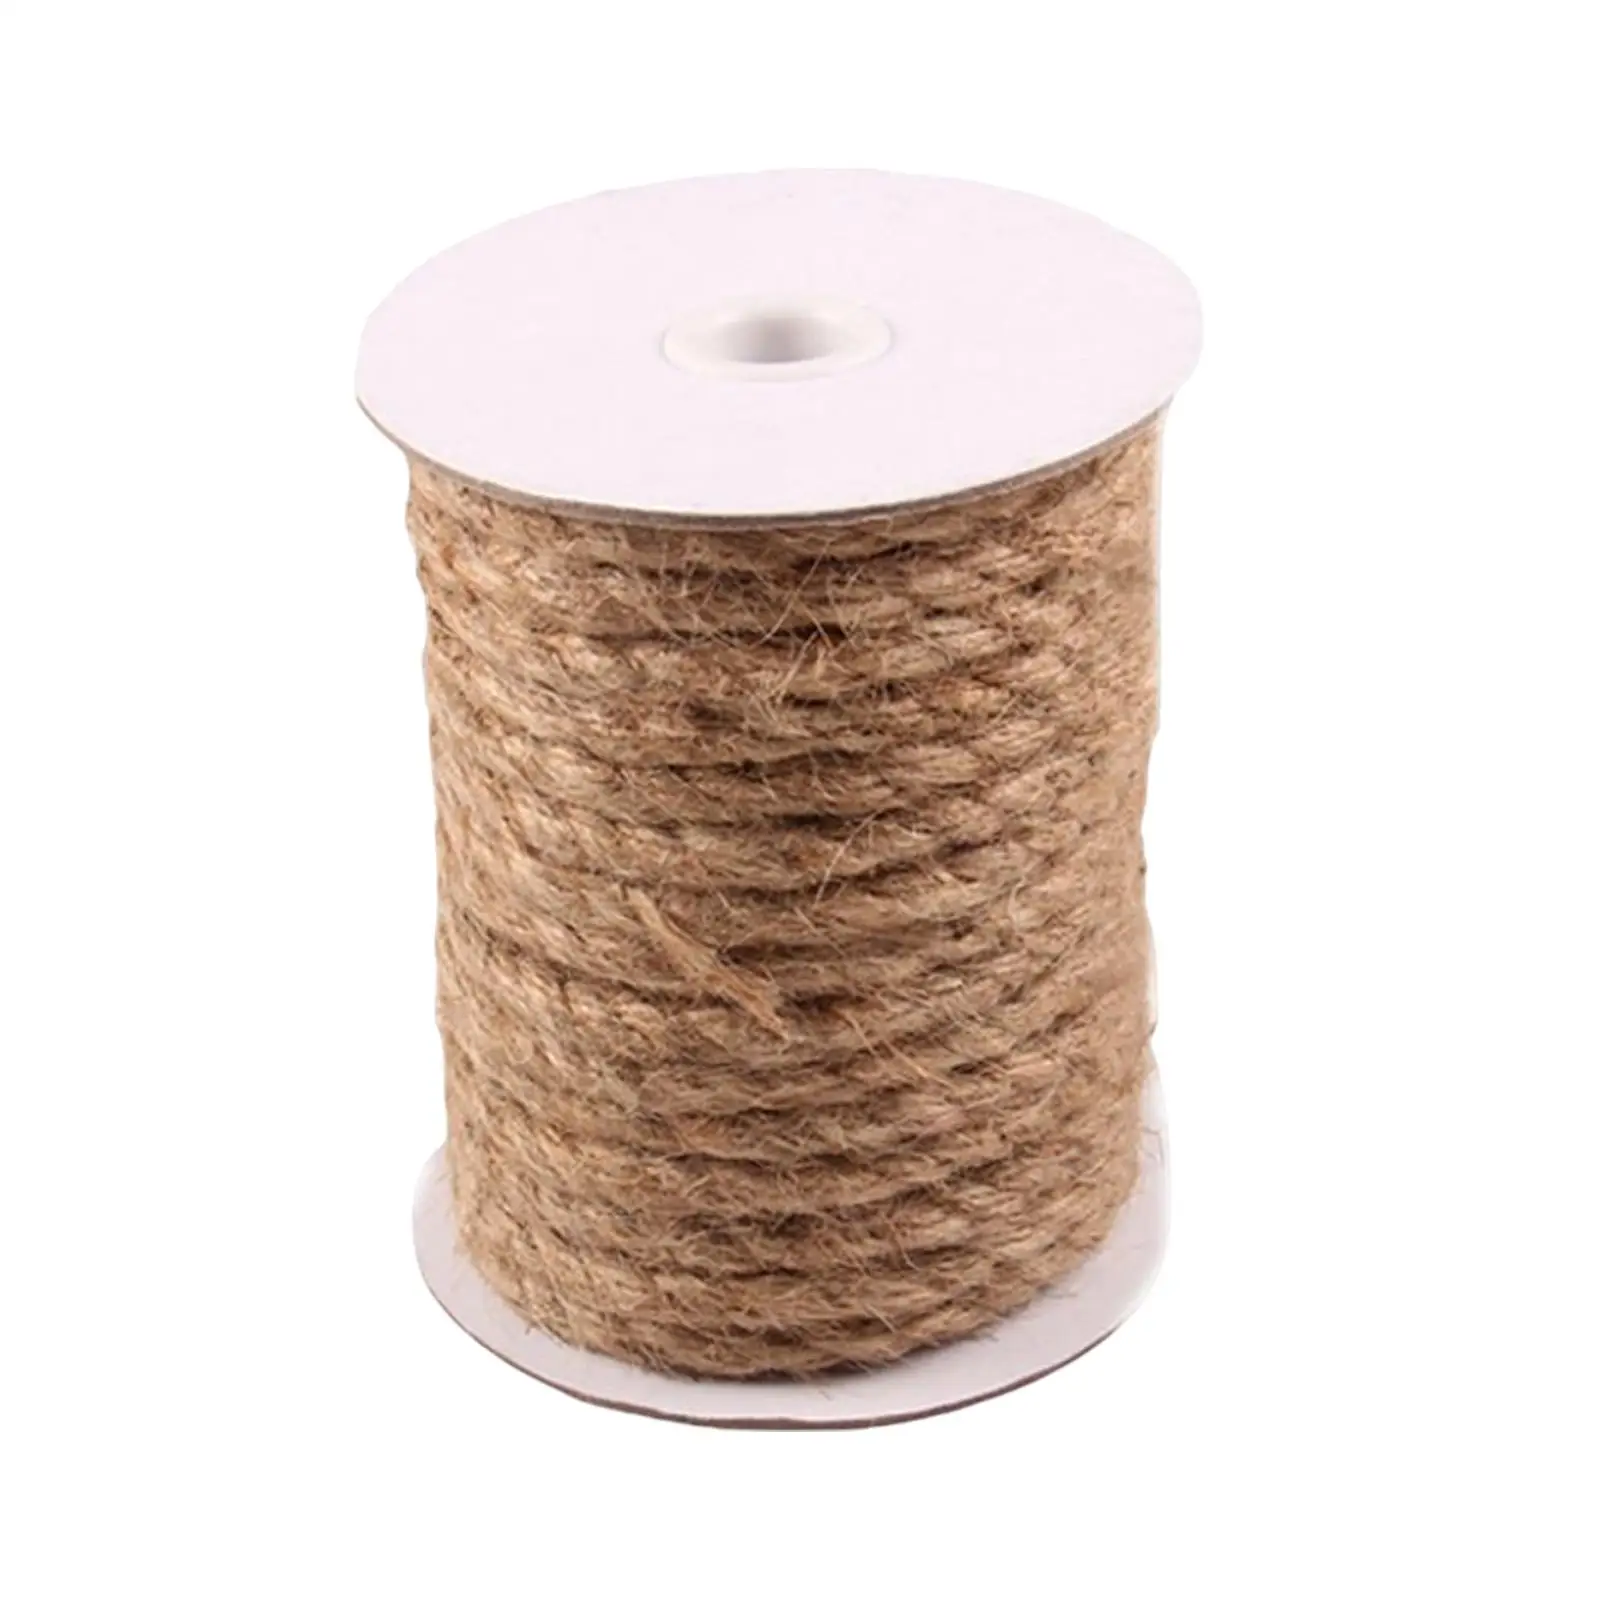 Twine Rope Weaving Rope Multipurpose Packing Cords Hemp Rope for Pet Toys Decorative Accents Macrame DIY Projects